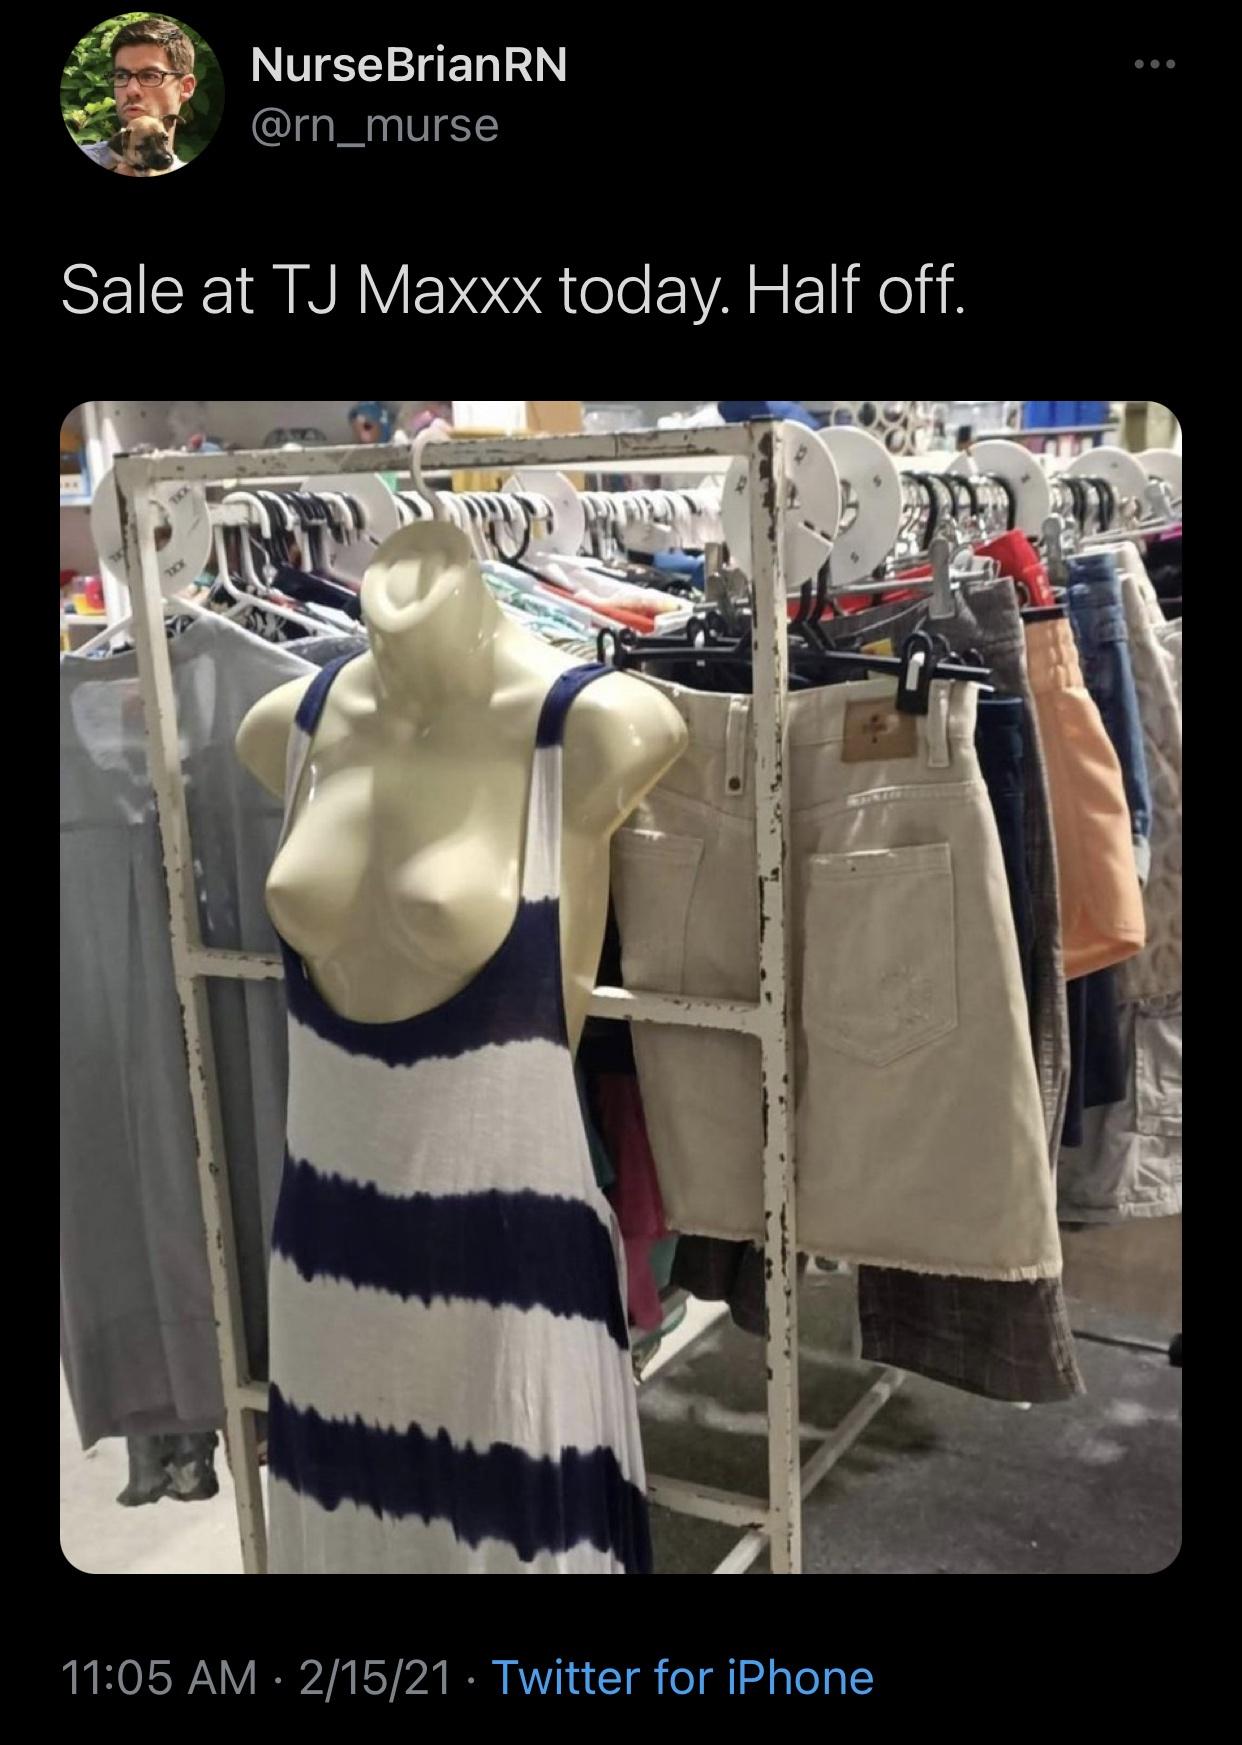 photo caption - Nurse BrianRN Sale at Tj Maxxx today. Half off. 21521 Twitter for iPhone